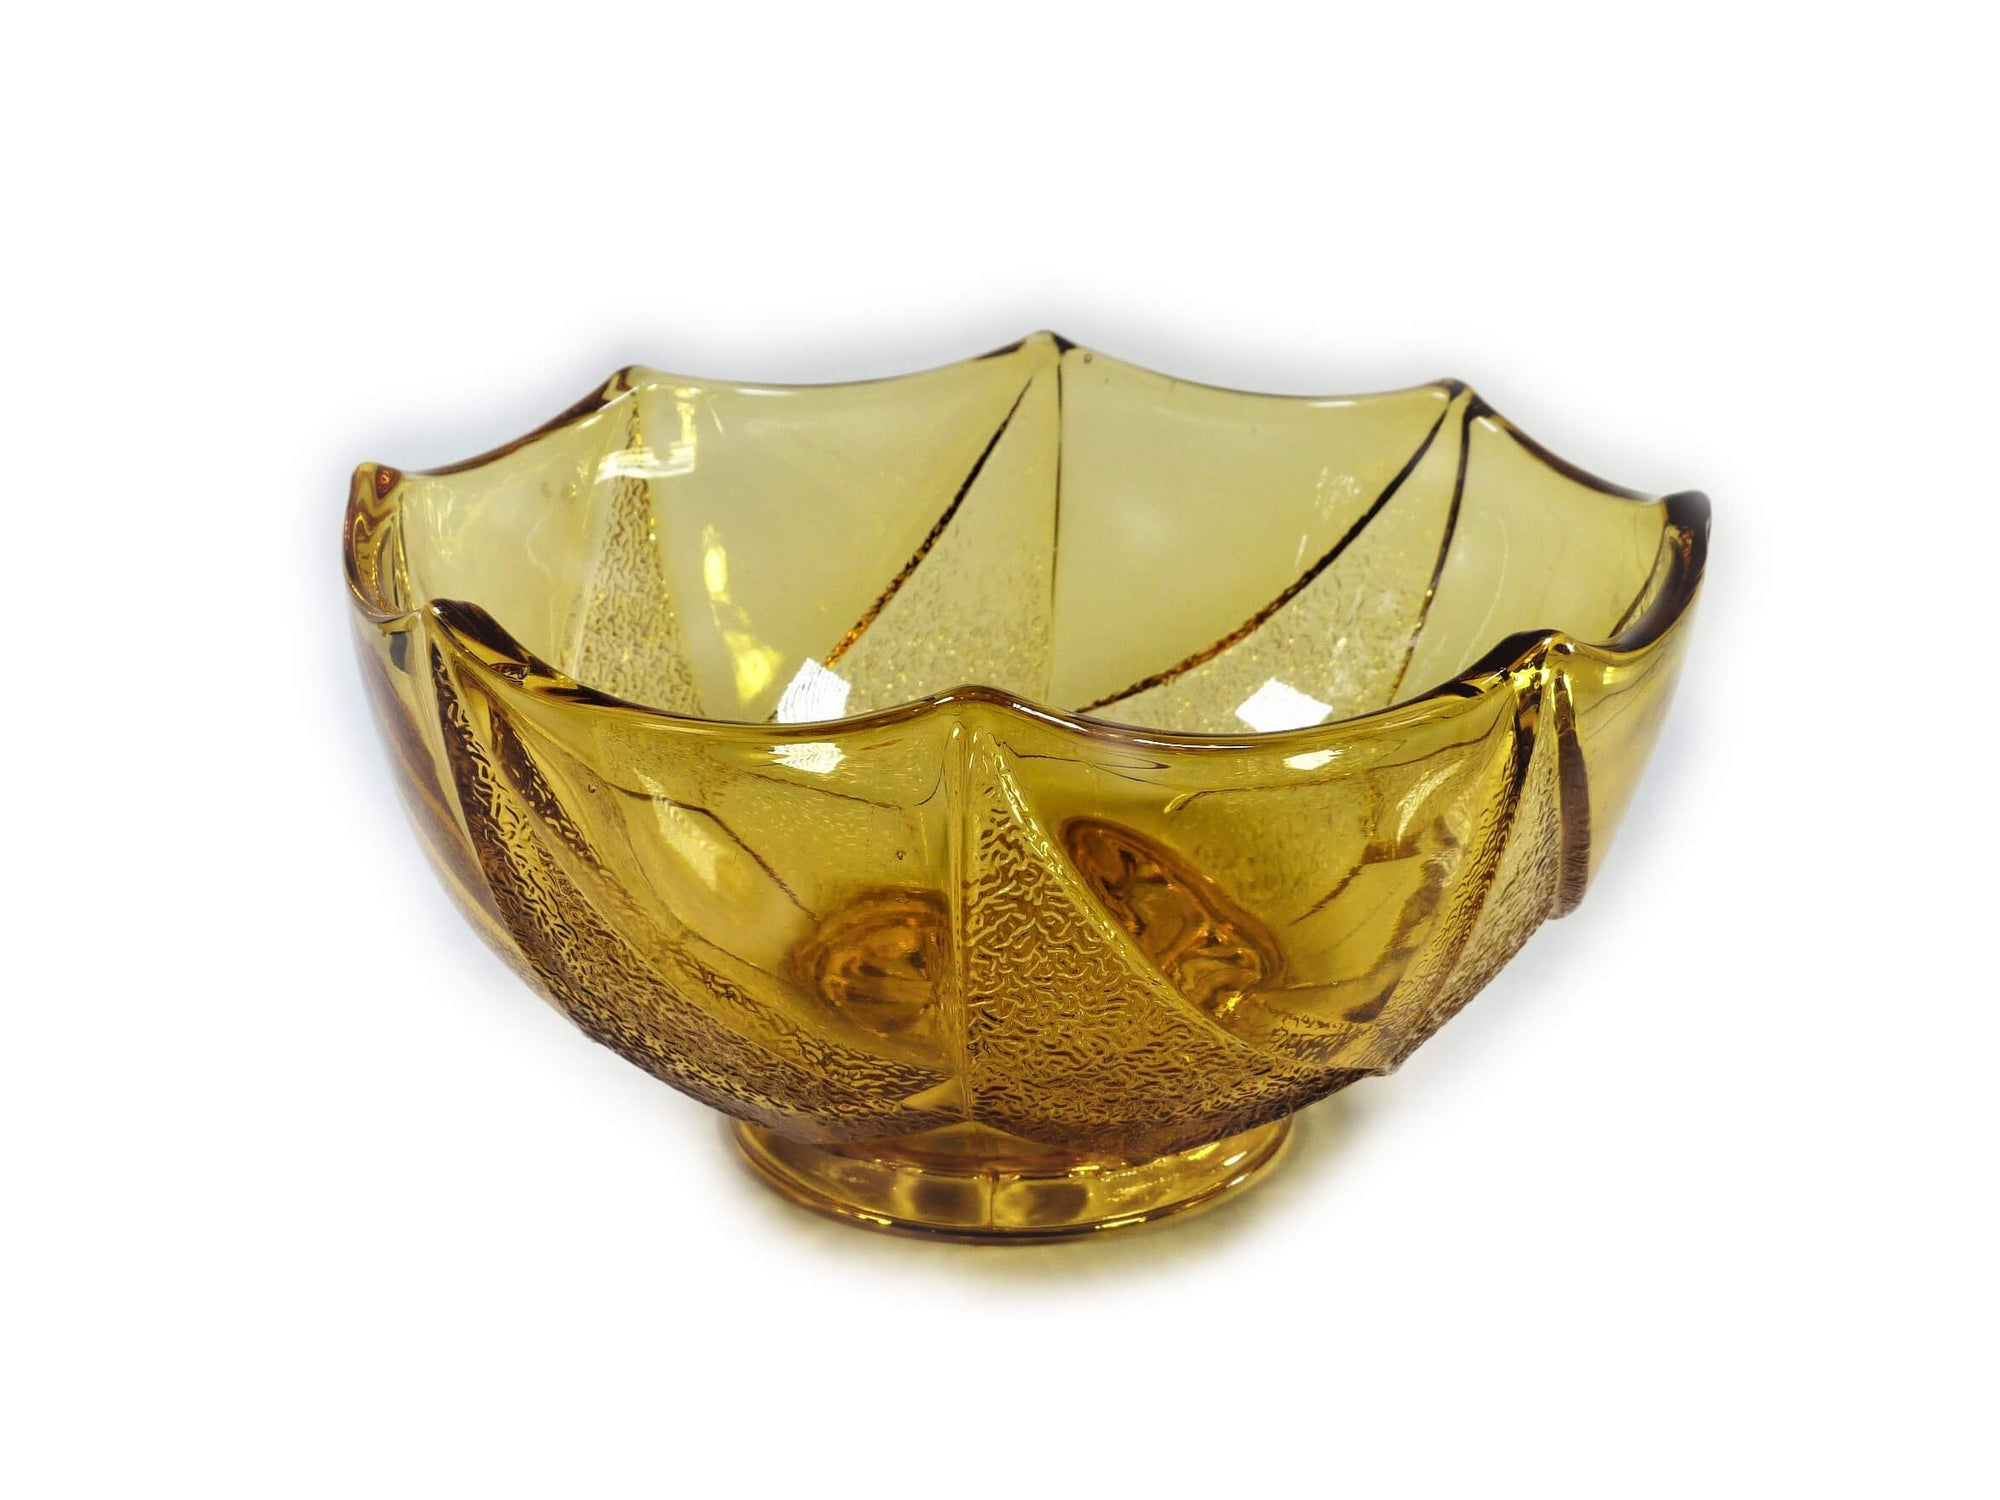 Art Deco Amber Glass Bowl, Sowerby 1940's Serving Bowl